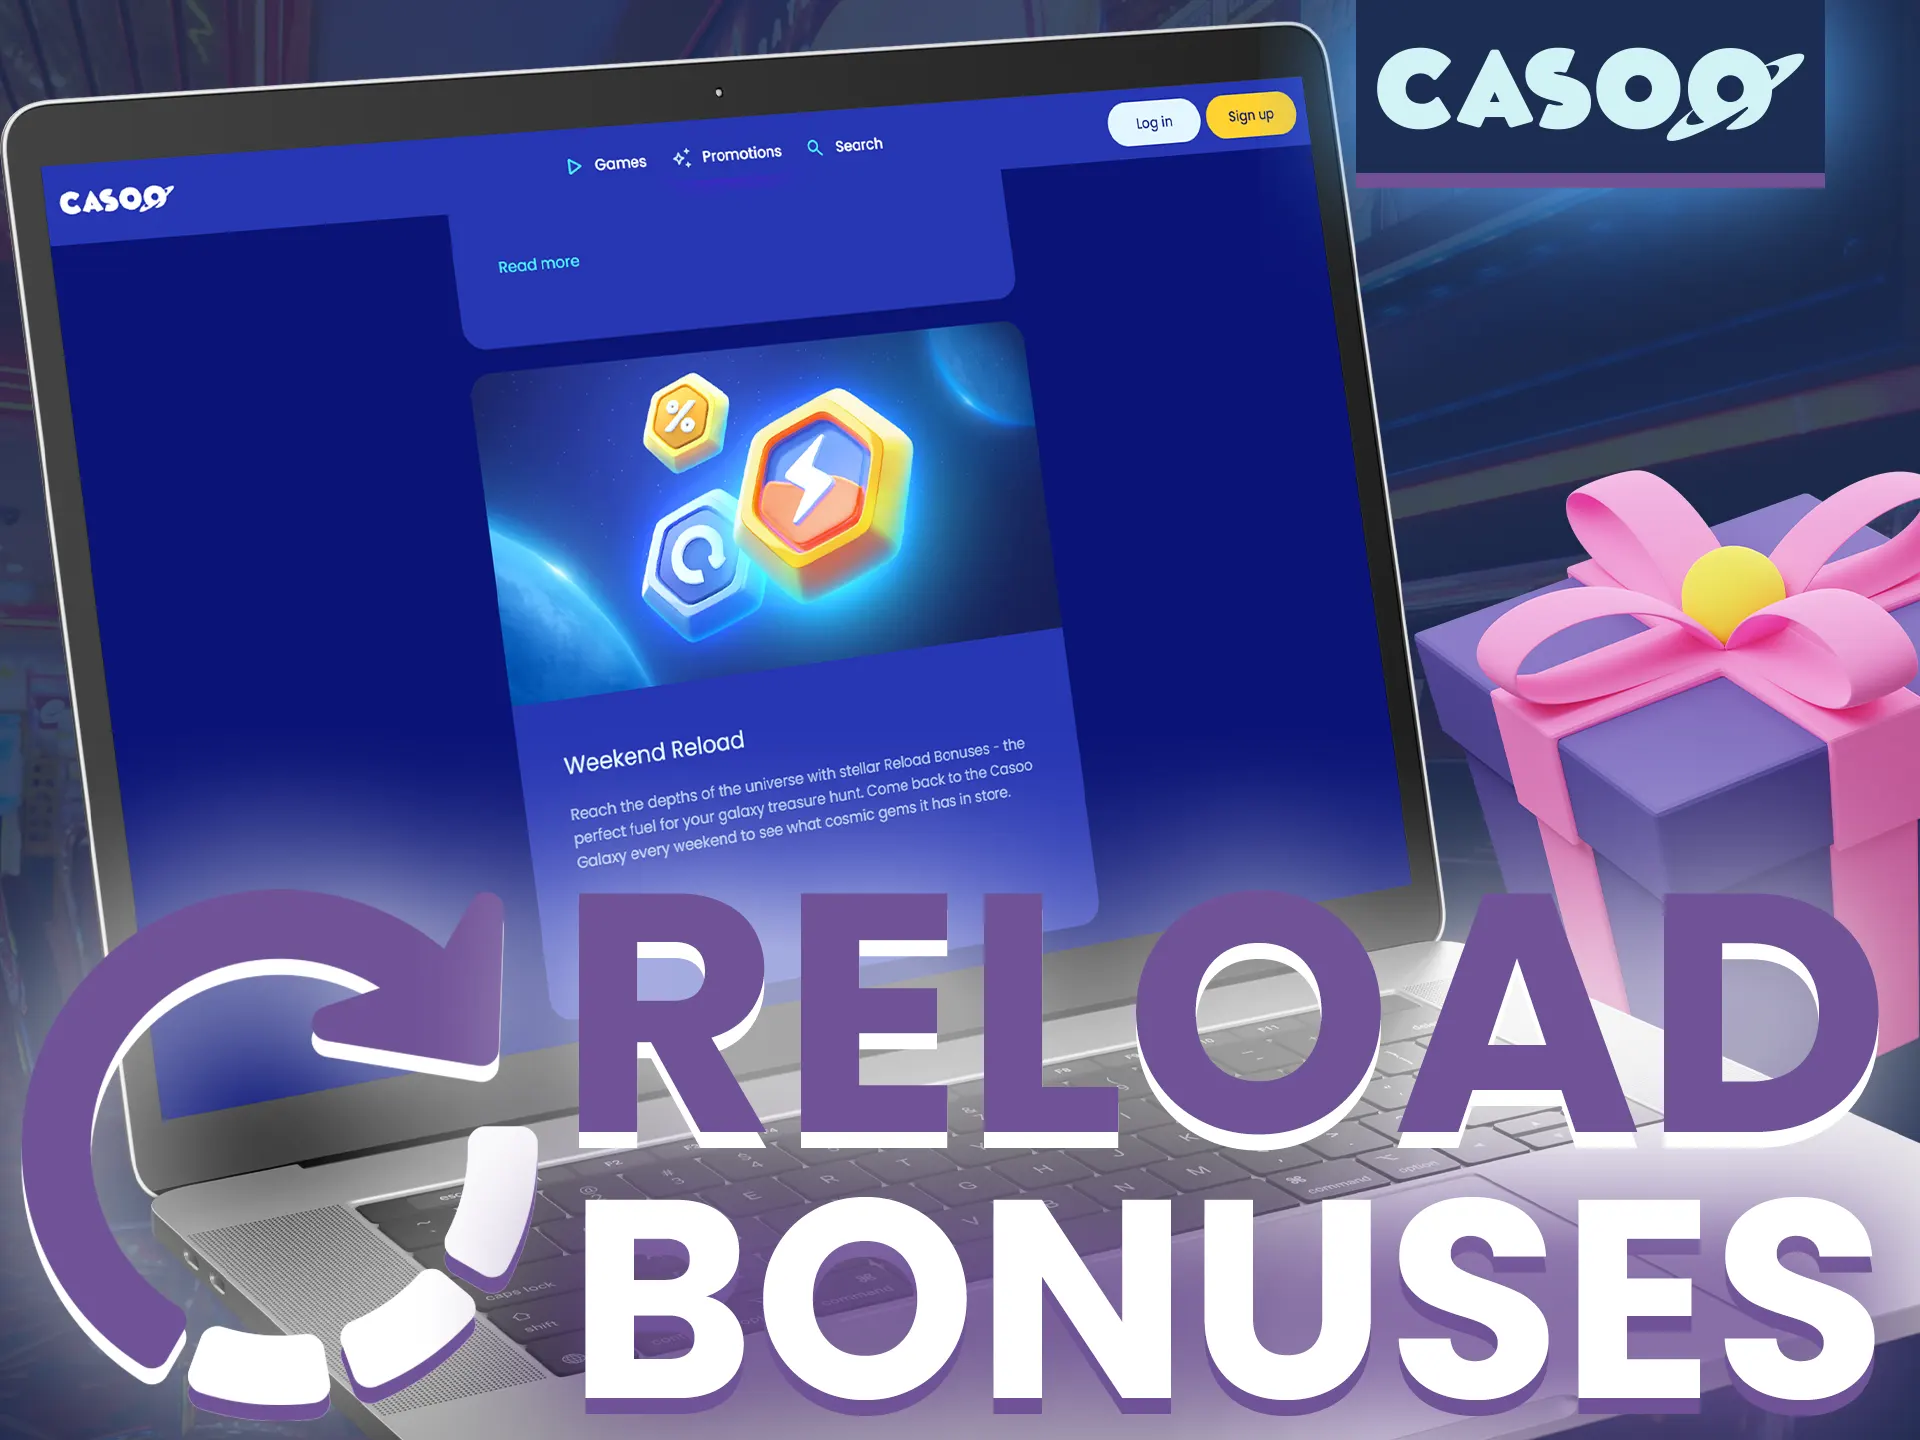 Play actively at Casoo Casino and get more favorable bonus terms.